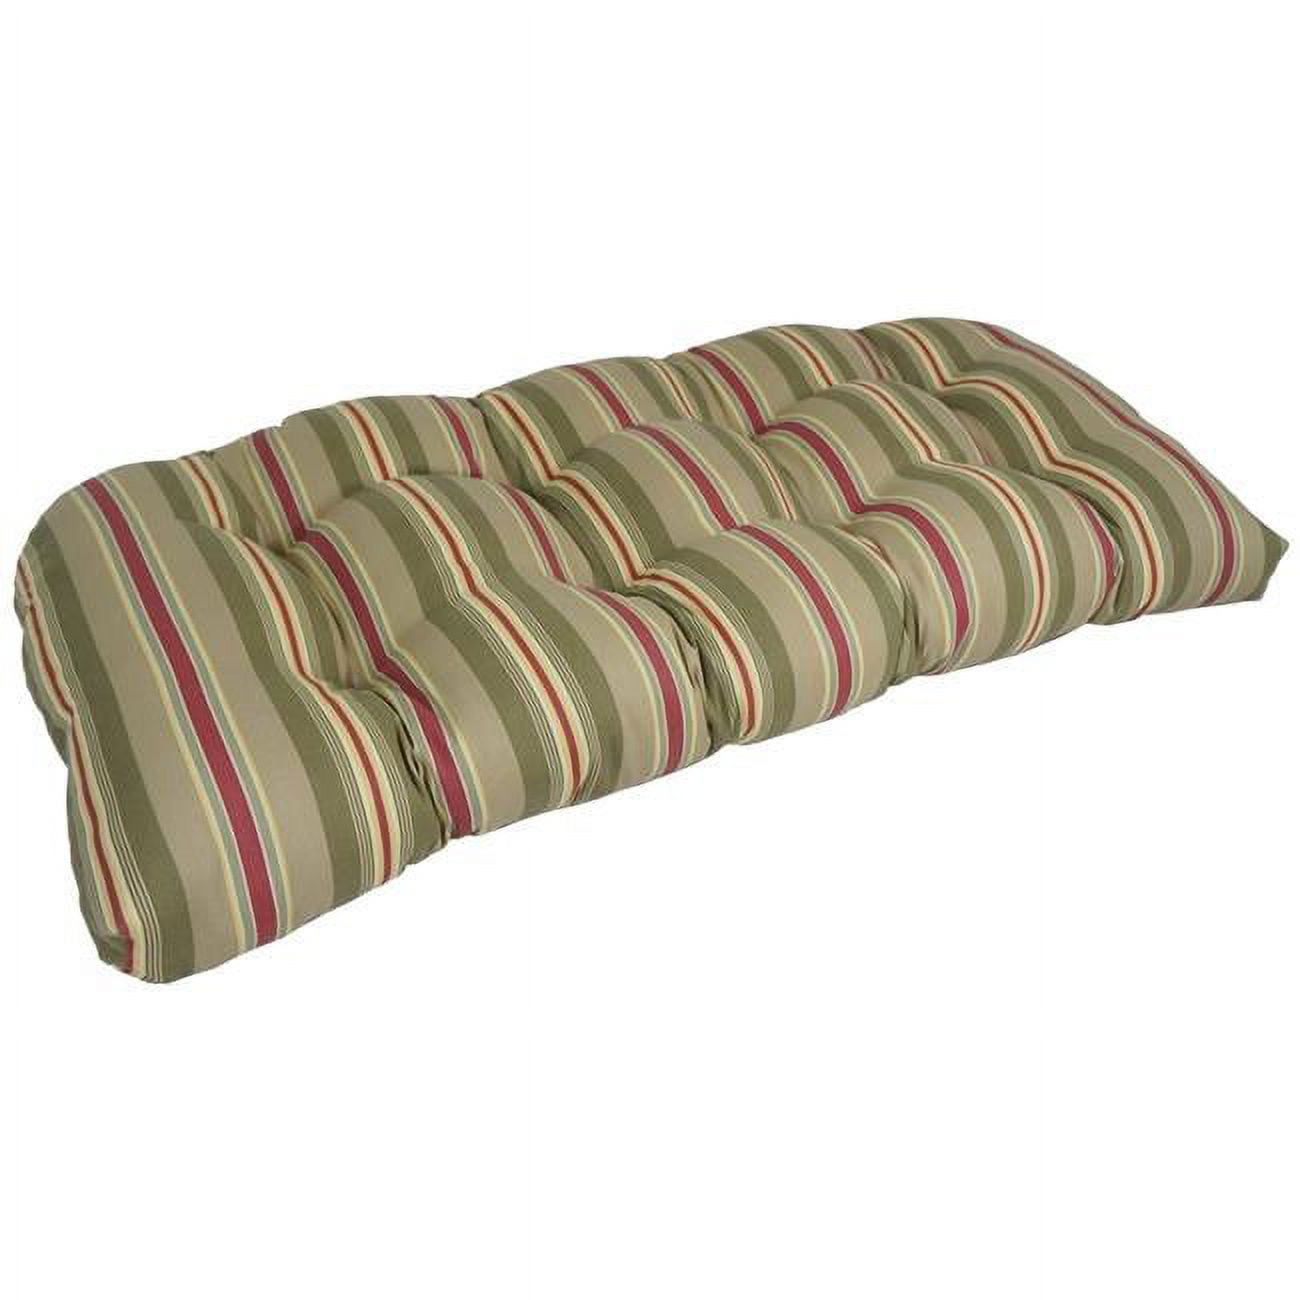 Picture of Blazing Needles 93180-LS-OD-023 42 x 19 in. U-Shaped Patterned Spun Polyester Tufted Settee & Bench Cushion&#44; Sunrise Zebra